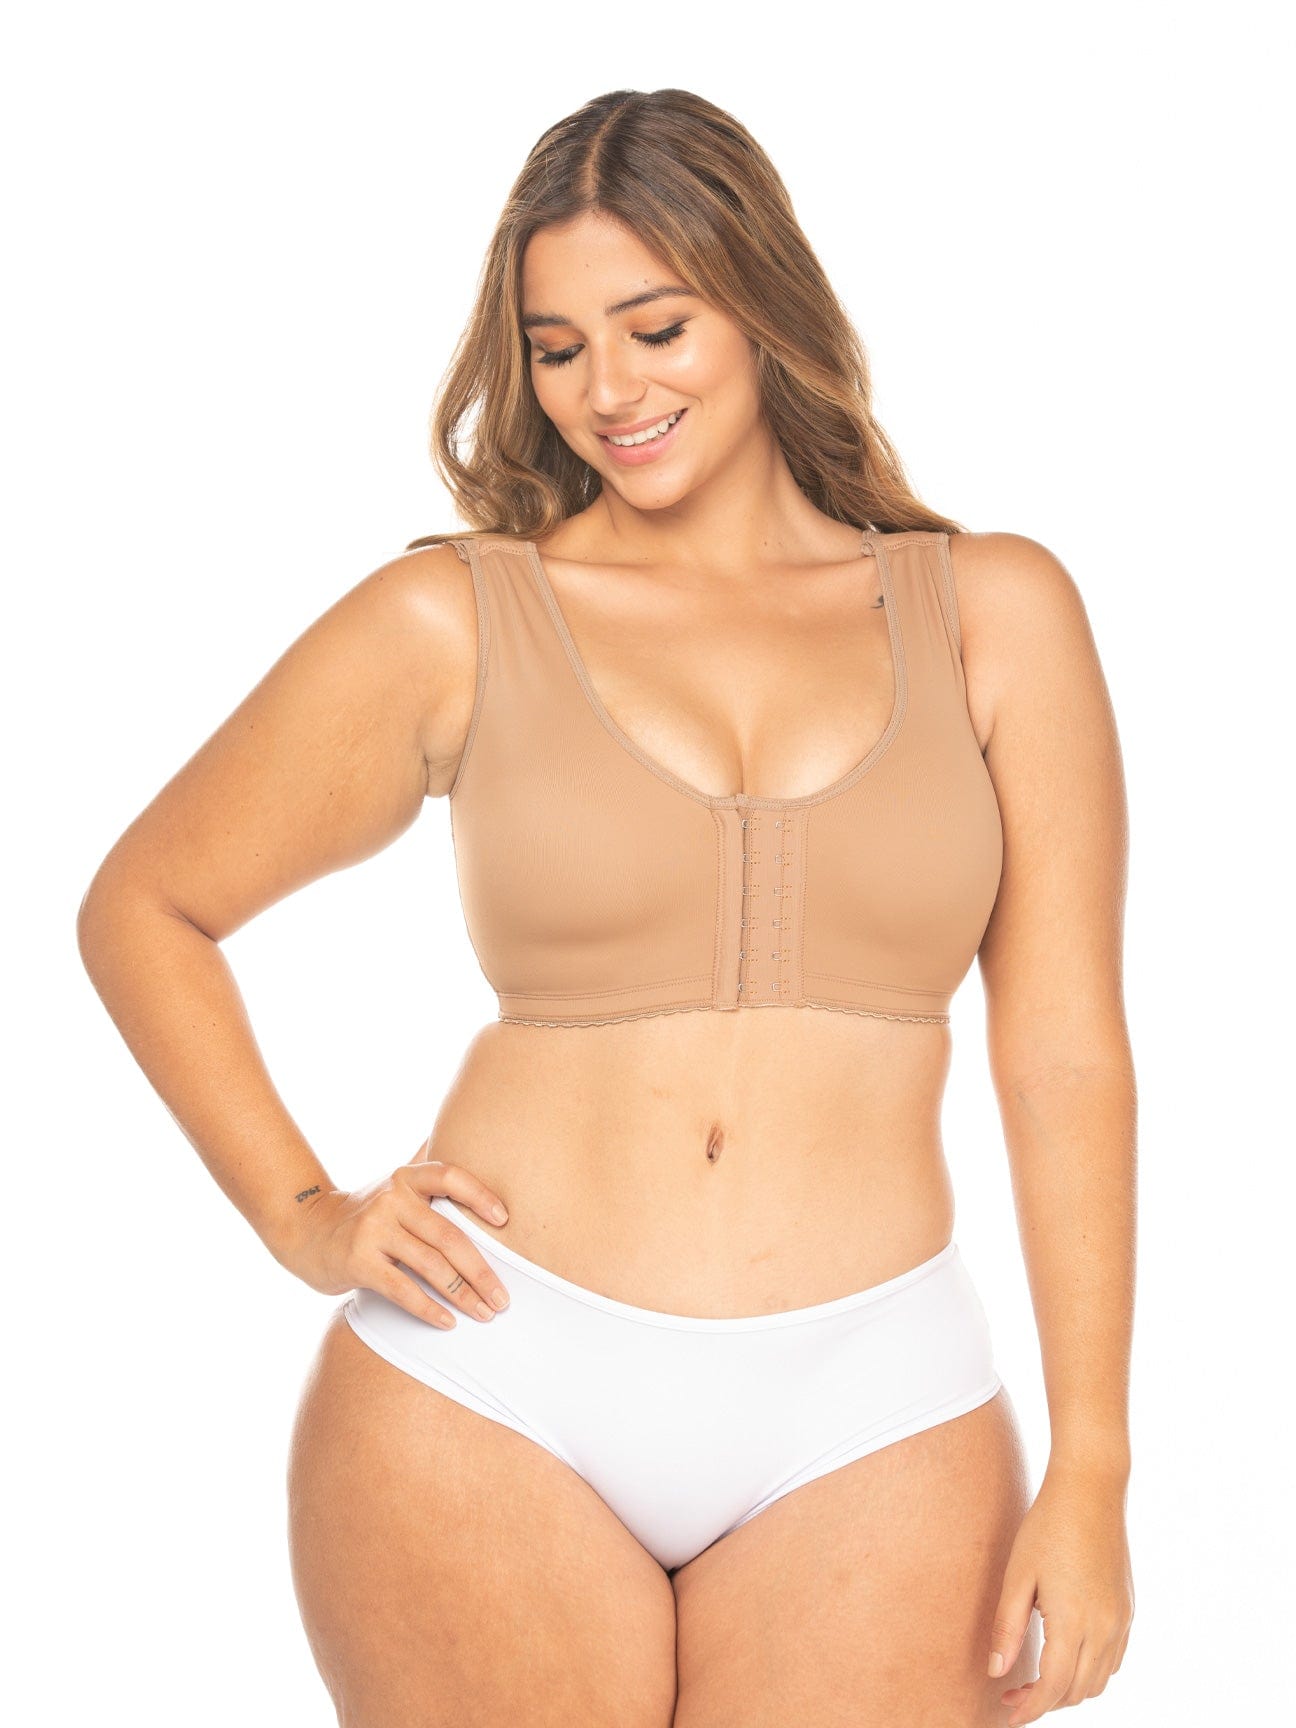 Full body view of a model wearing the shapewear bra with central hooks.